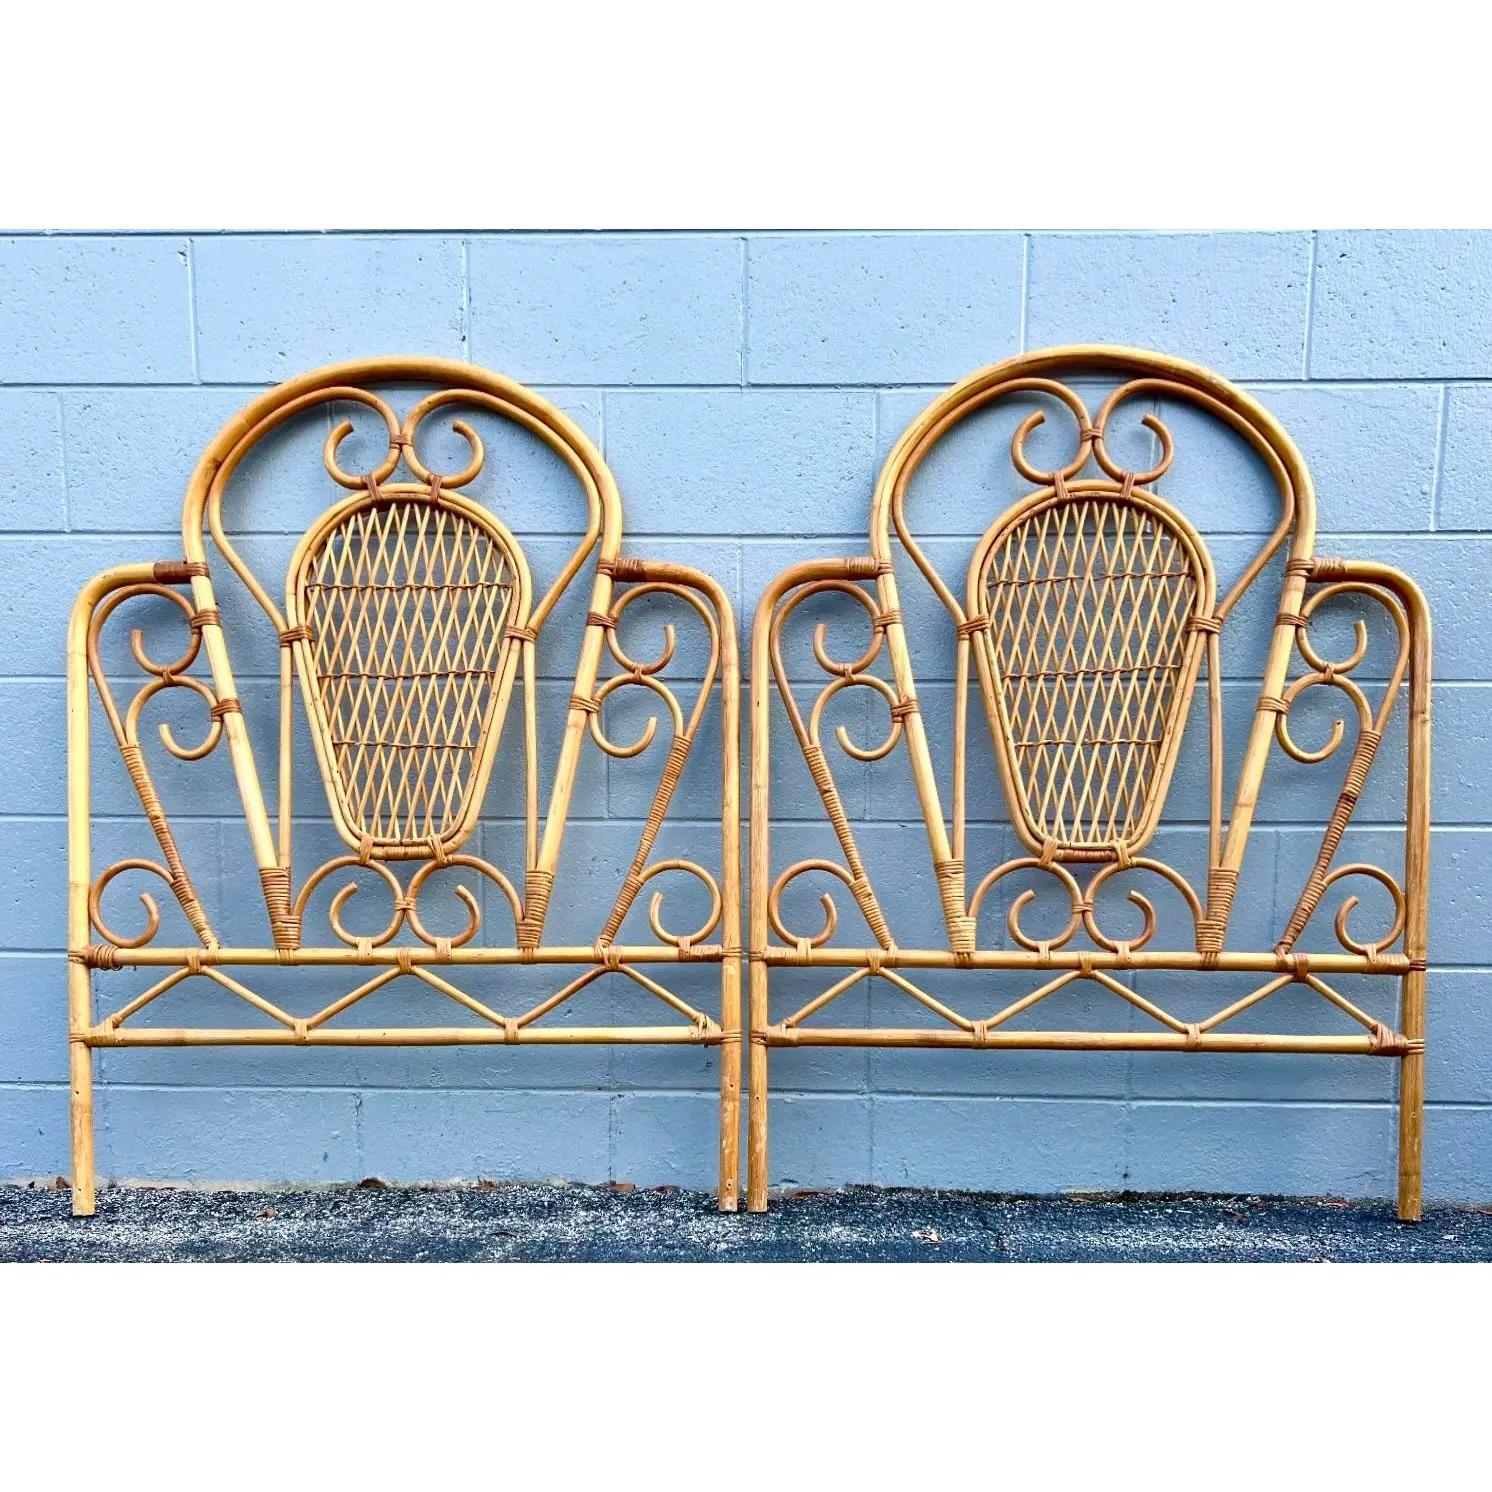 Fabulous vintage coastal Twin headboards. Beautiful bent rattan in a charming swirl design. Inset panels of trellis rattan. Acquired from a Palm Beach estate.